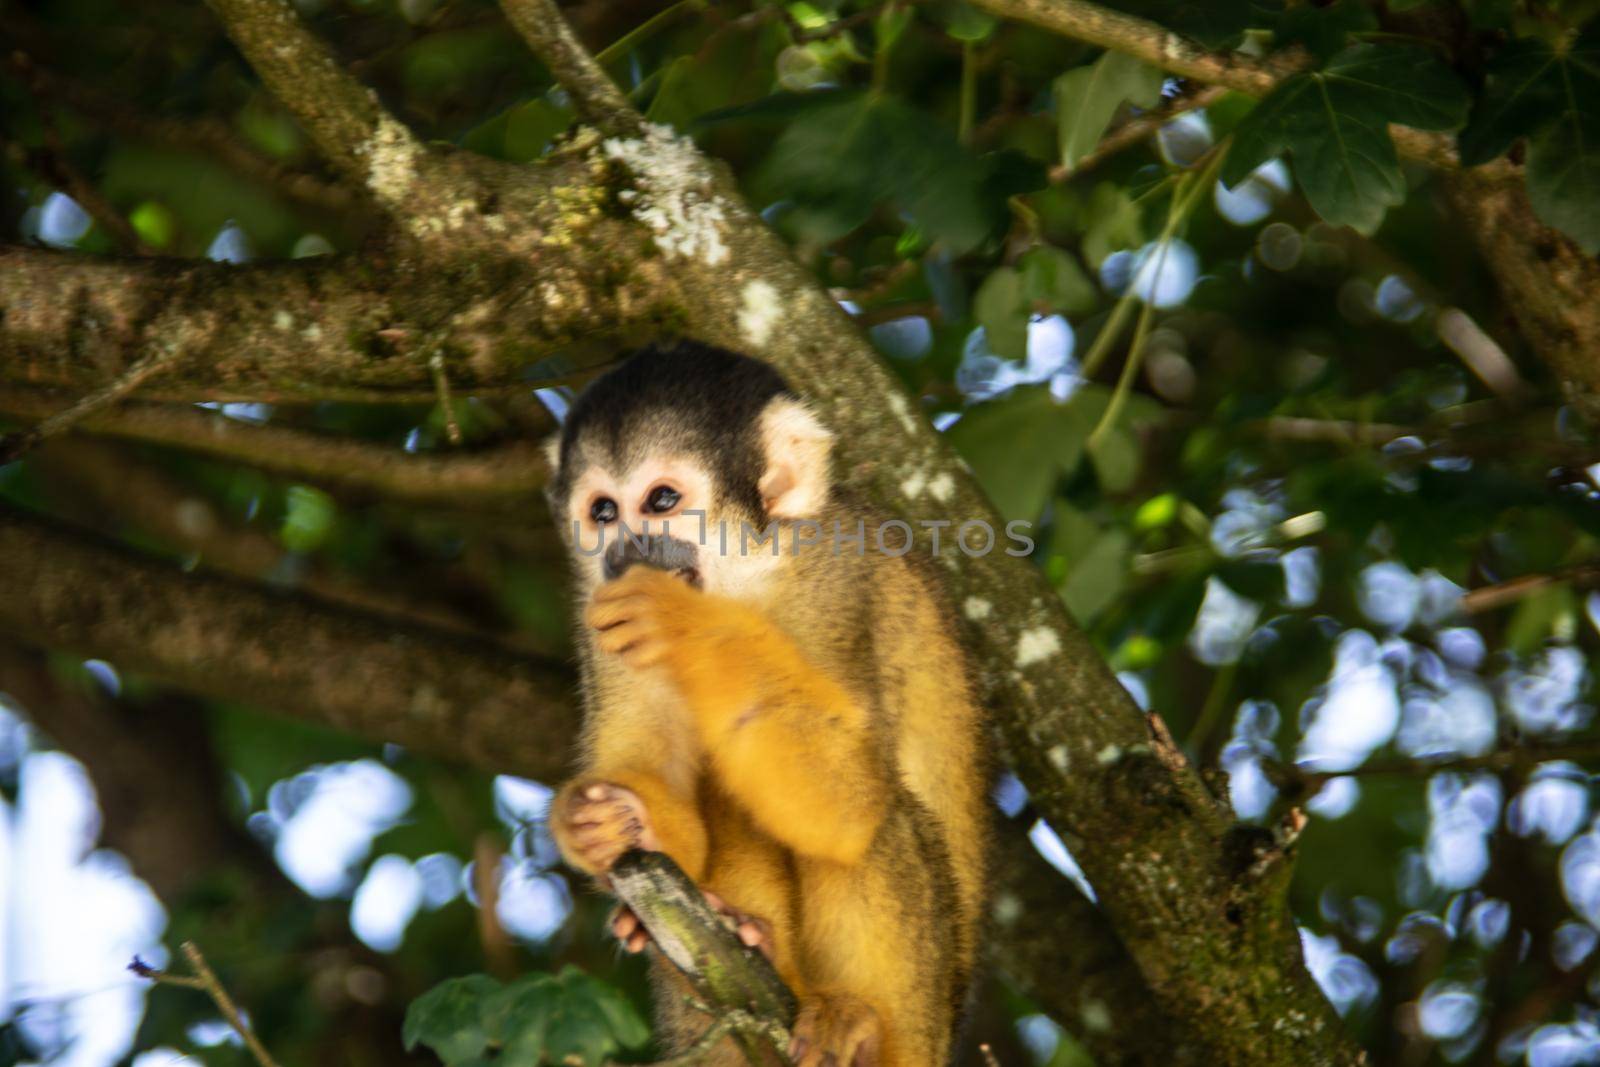 Squirrel monkey climbing in the tree